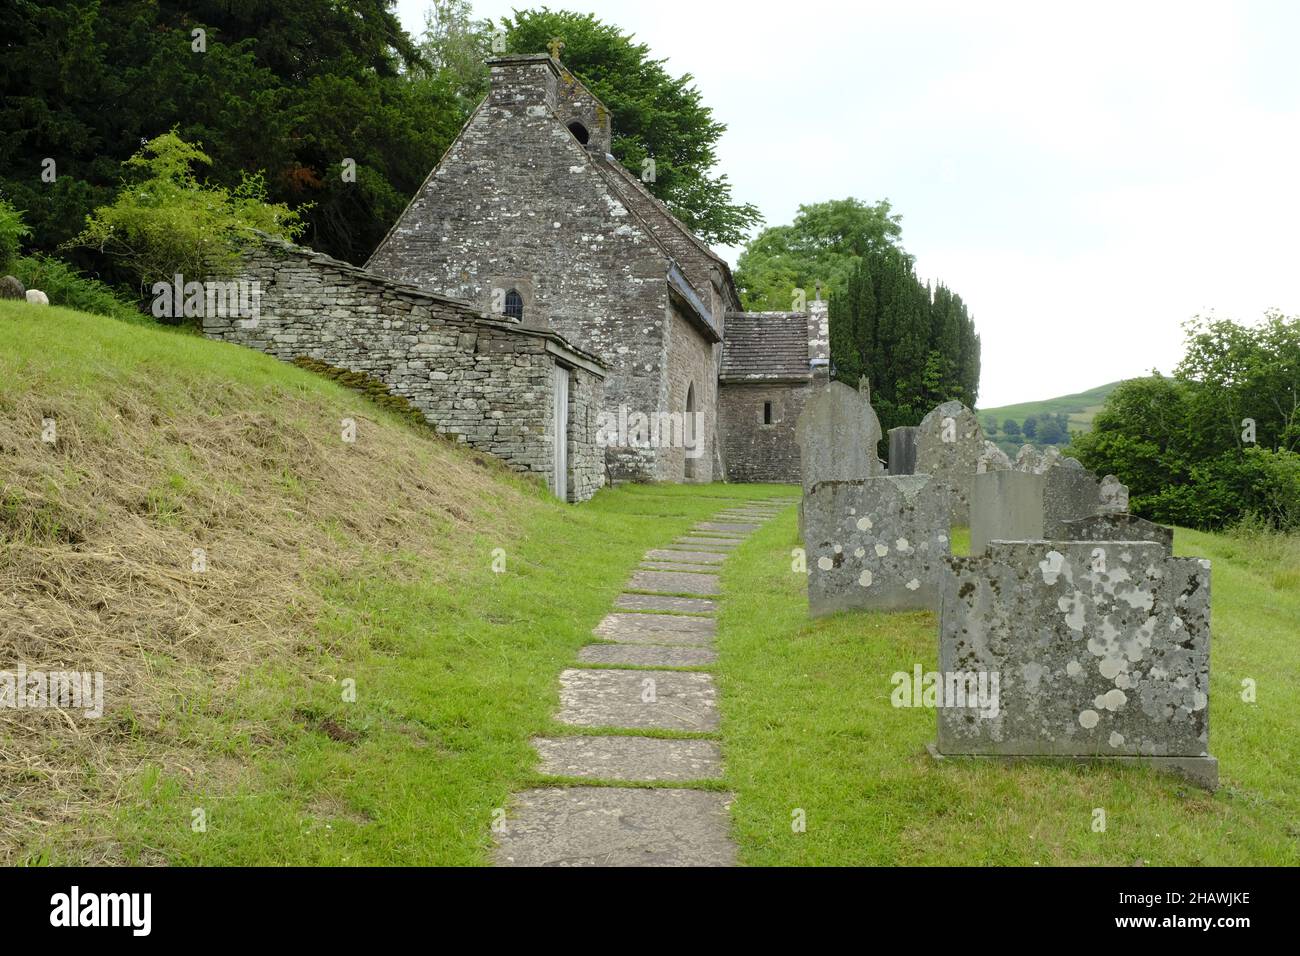 St. Issui's Church and graveyard with stone path, Partrishow, Powys, Wales Stock Photo